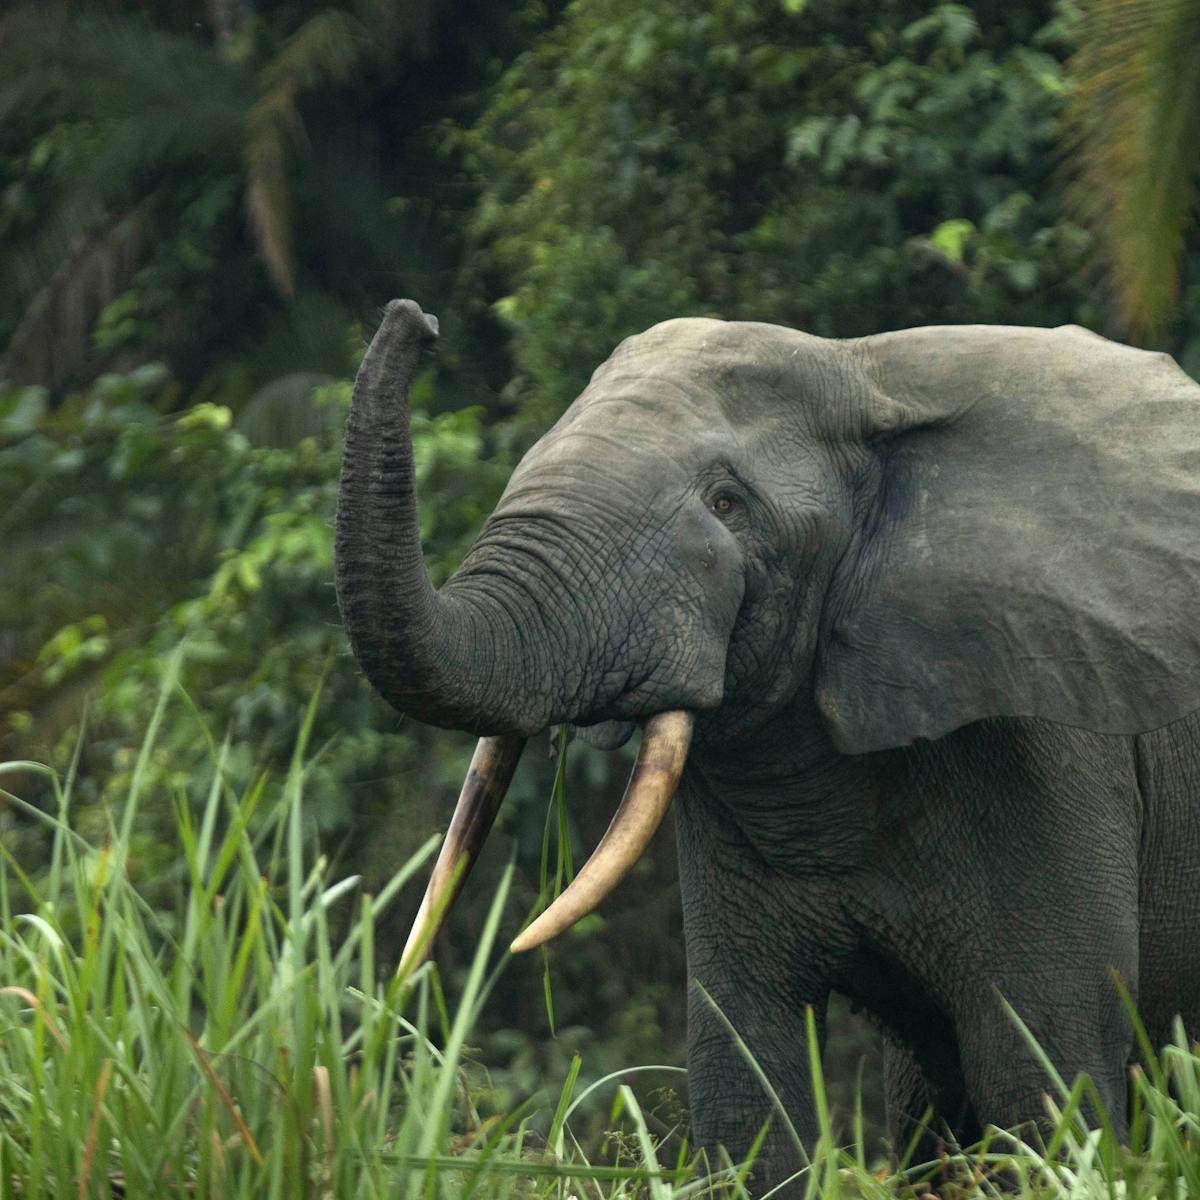 Africa's 2 elephant species are both endangered, due to poaching and  habitat loss